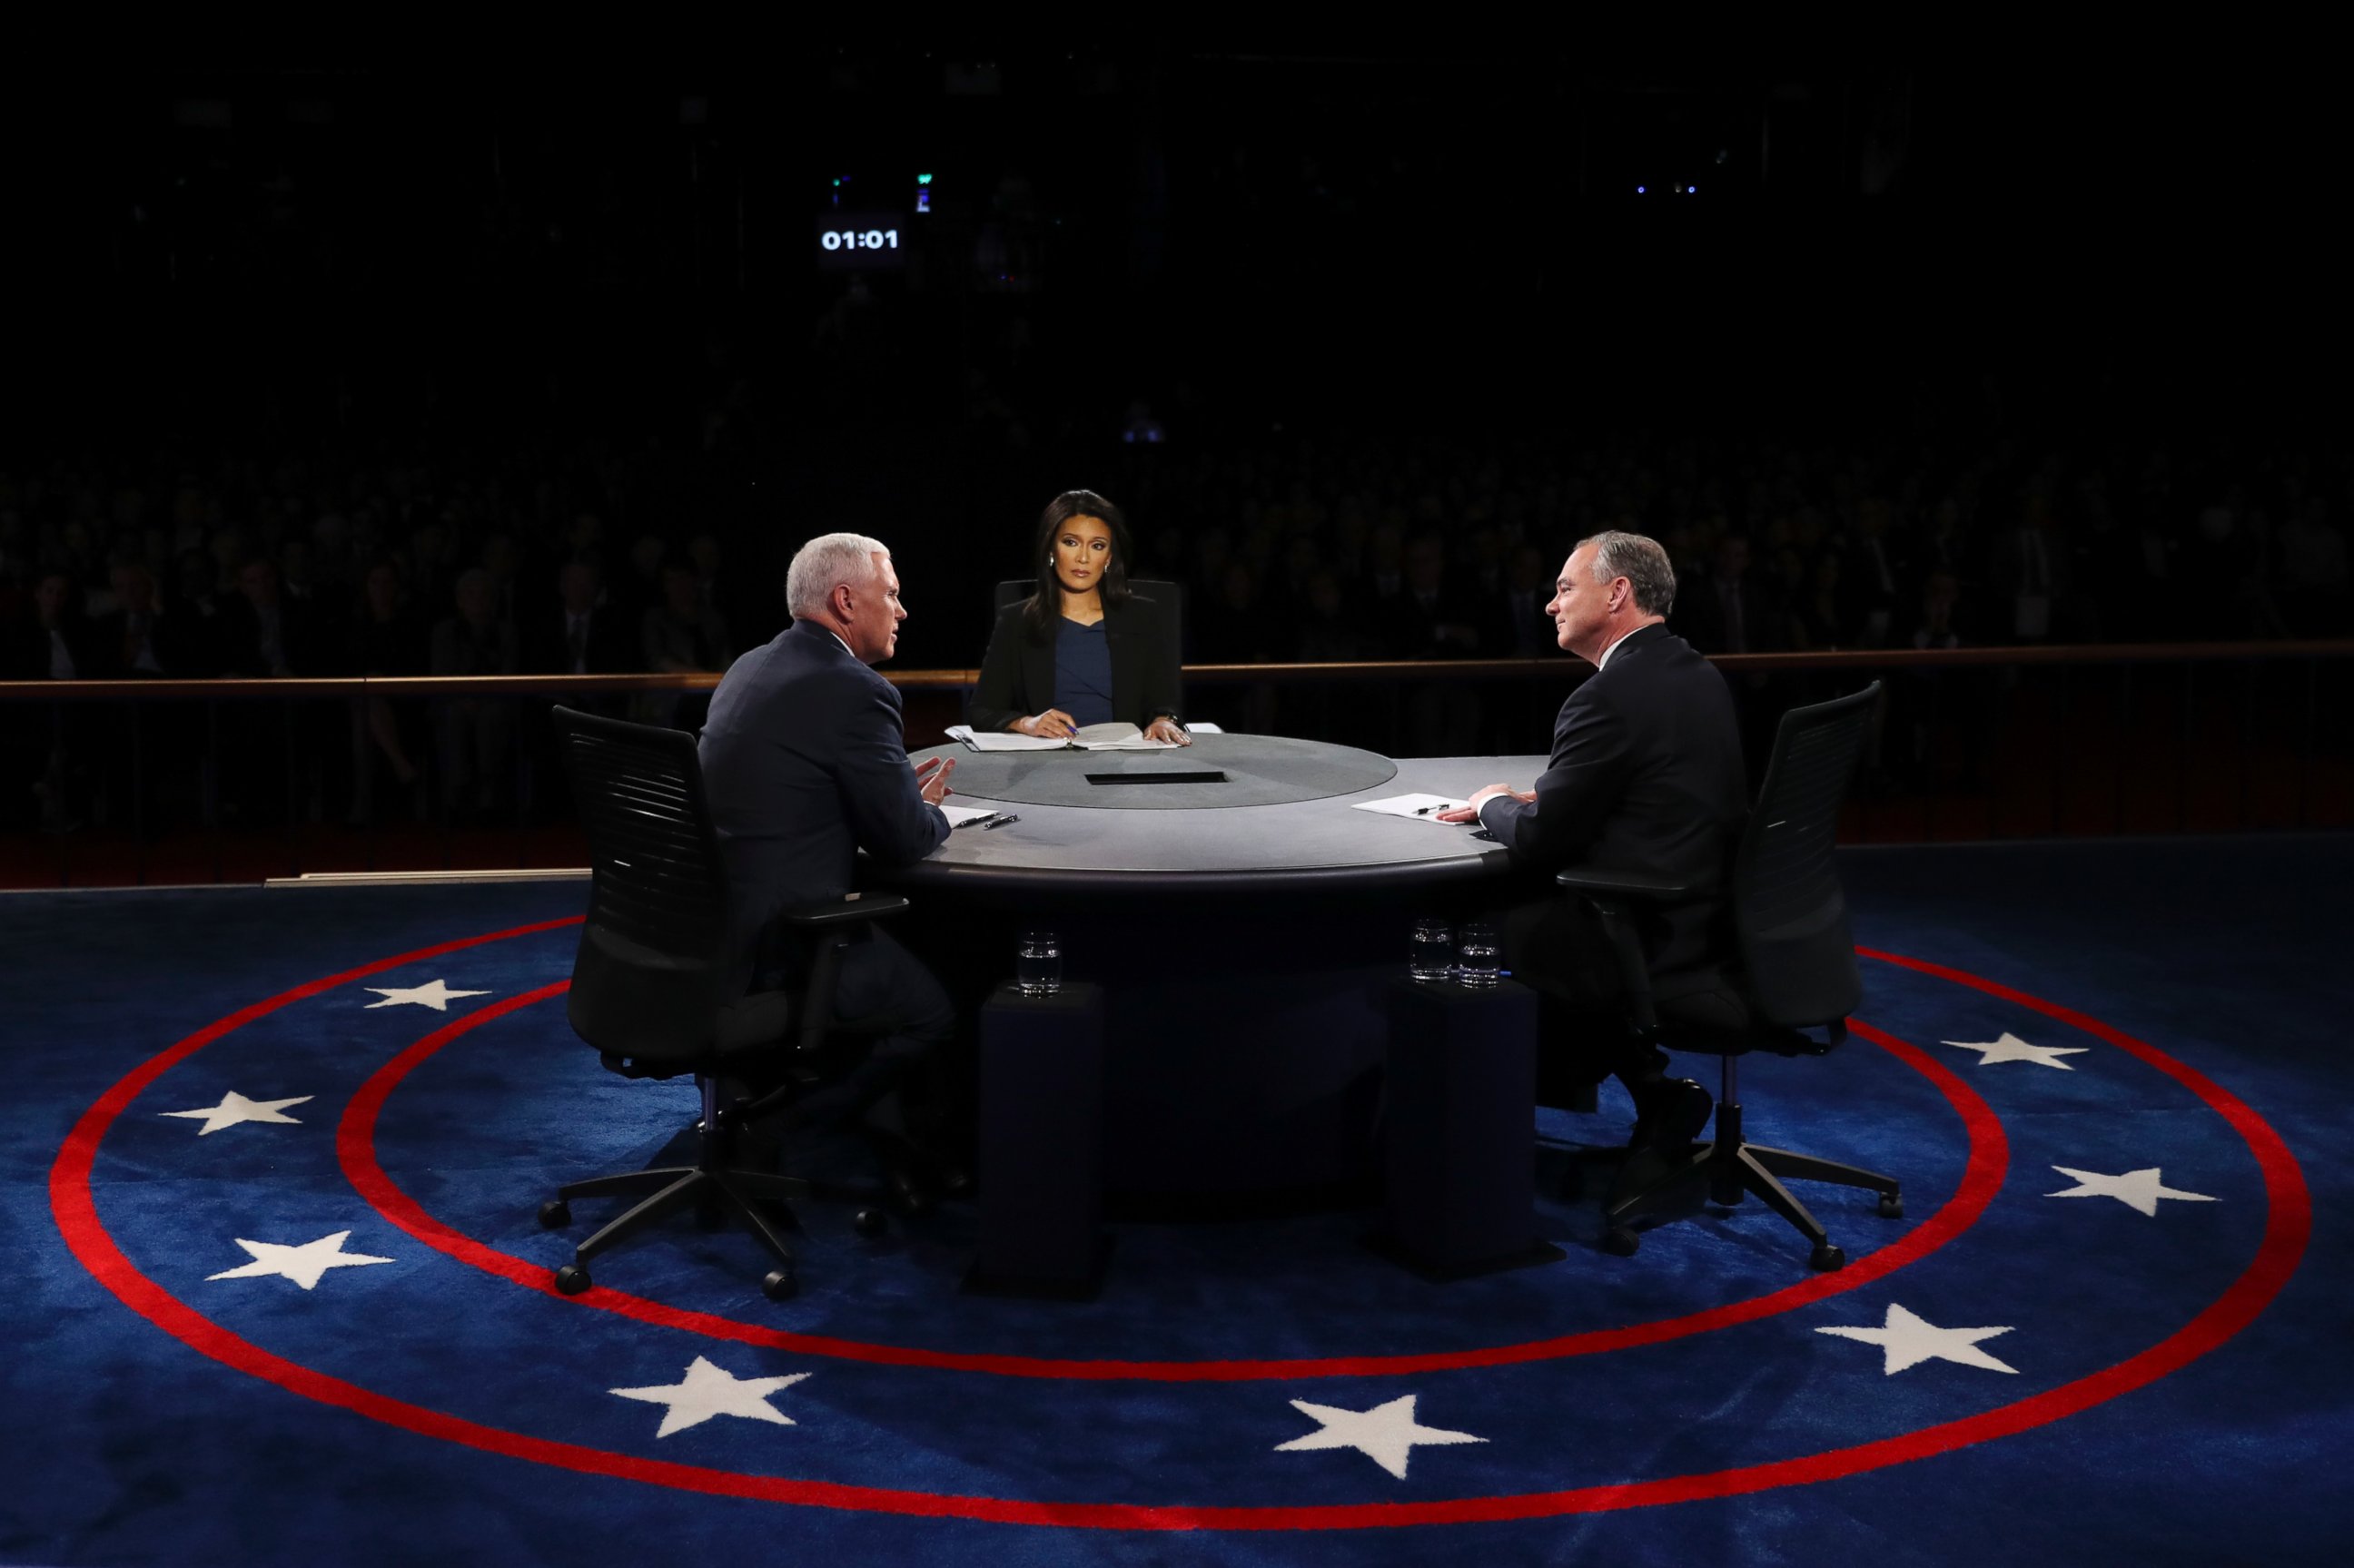 PHOTO: Republican vice-presidential nominee Gov. Mike Pence and Democratic vice-presidential nominee Sen. Tim Kaine discuss as Moderator Elaine Quijano listens during the vice-presidential debate at Longwood University in Farmville, Va., Oct. 4, 2016.